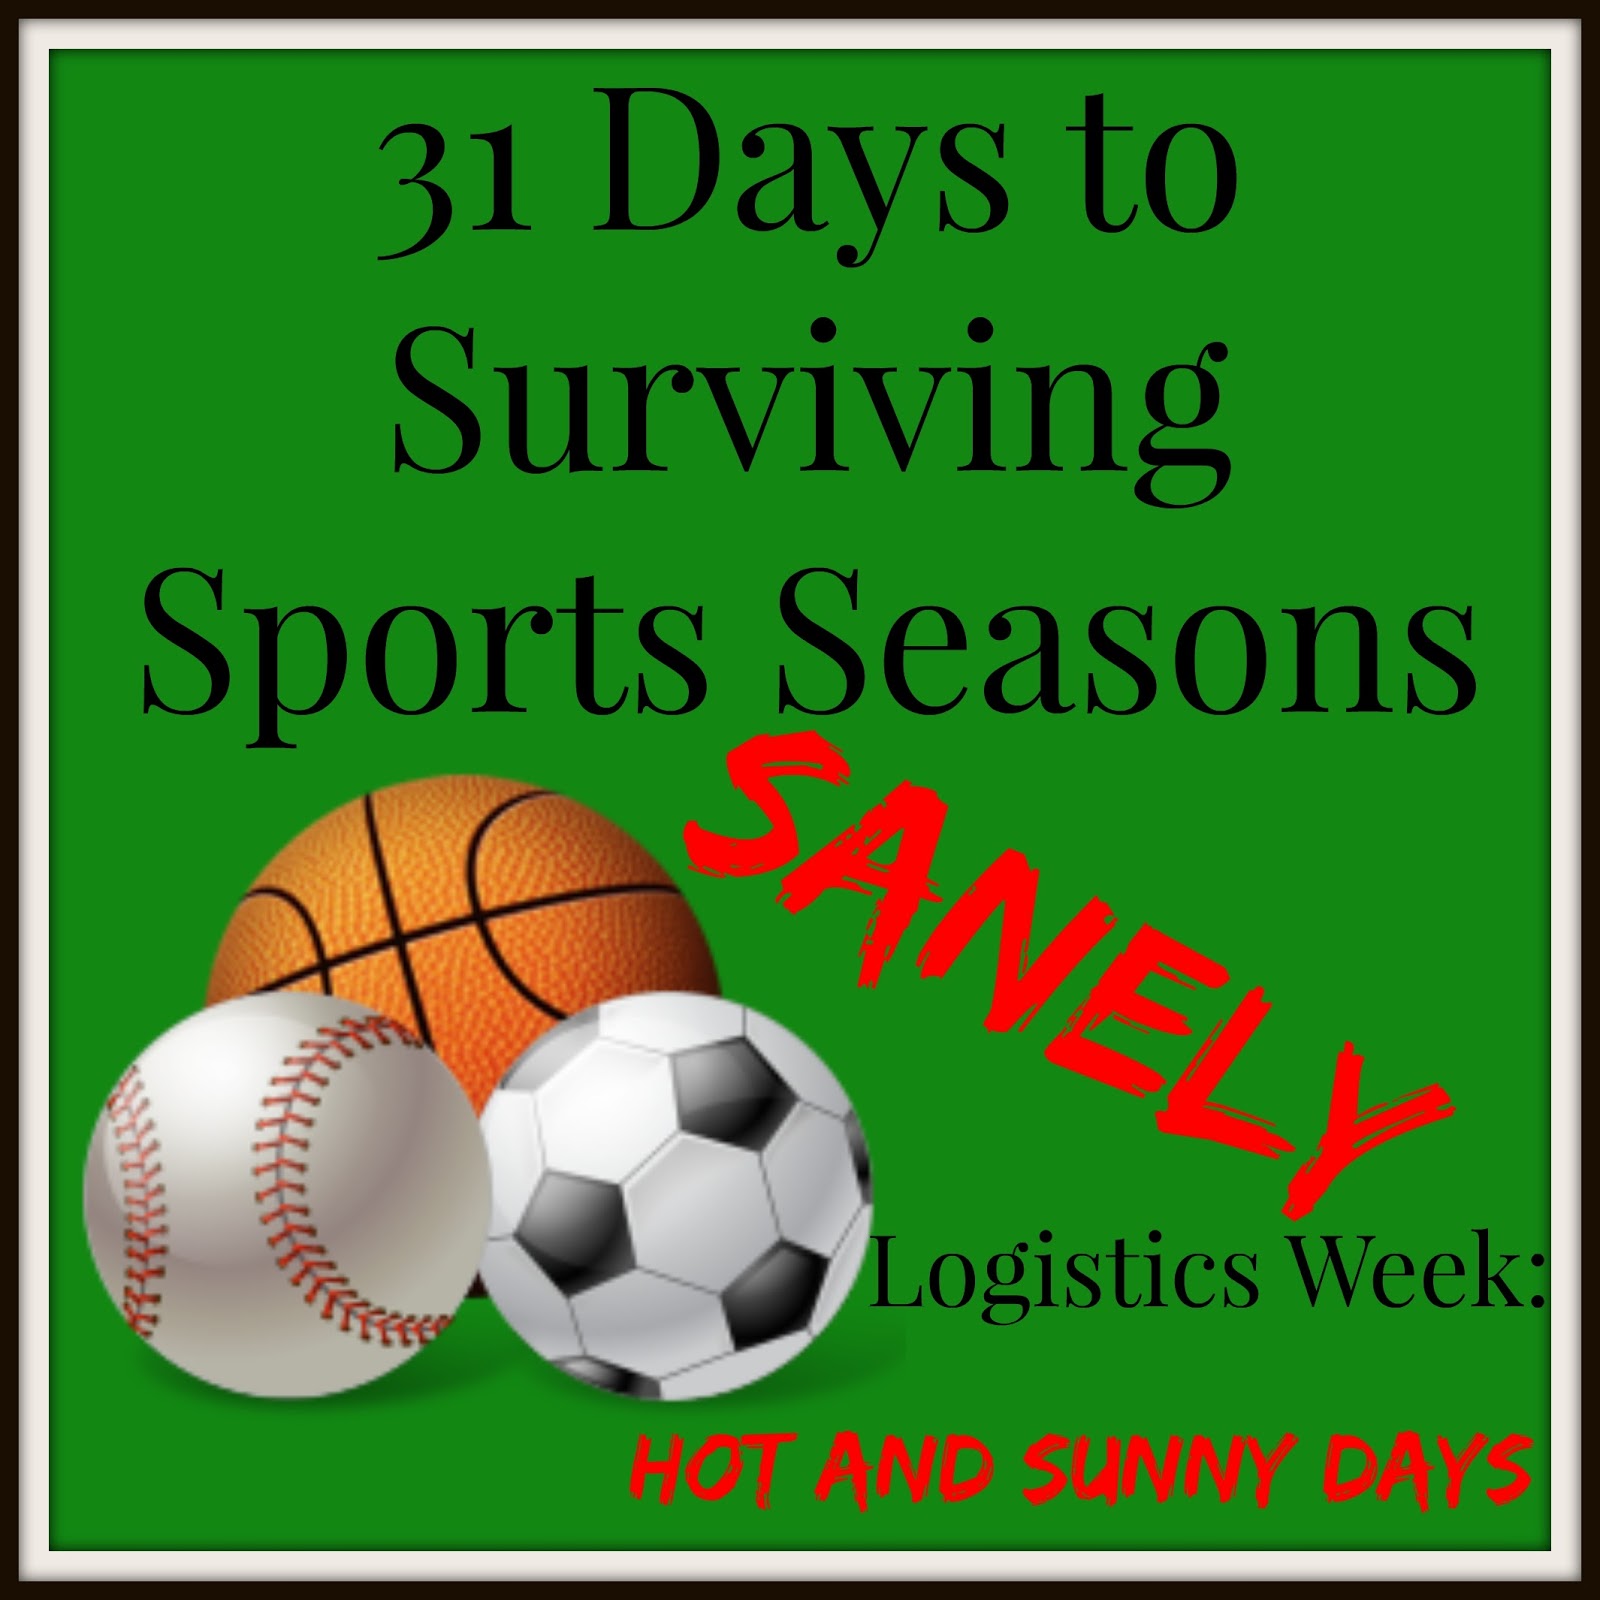 31 Days to Surviving Sports Seasons Sanely: Hot and Sunny Days